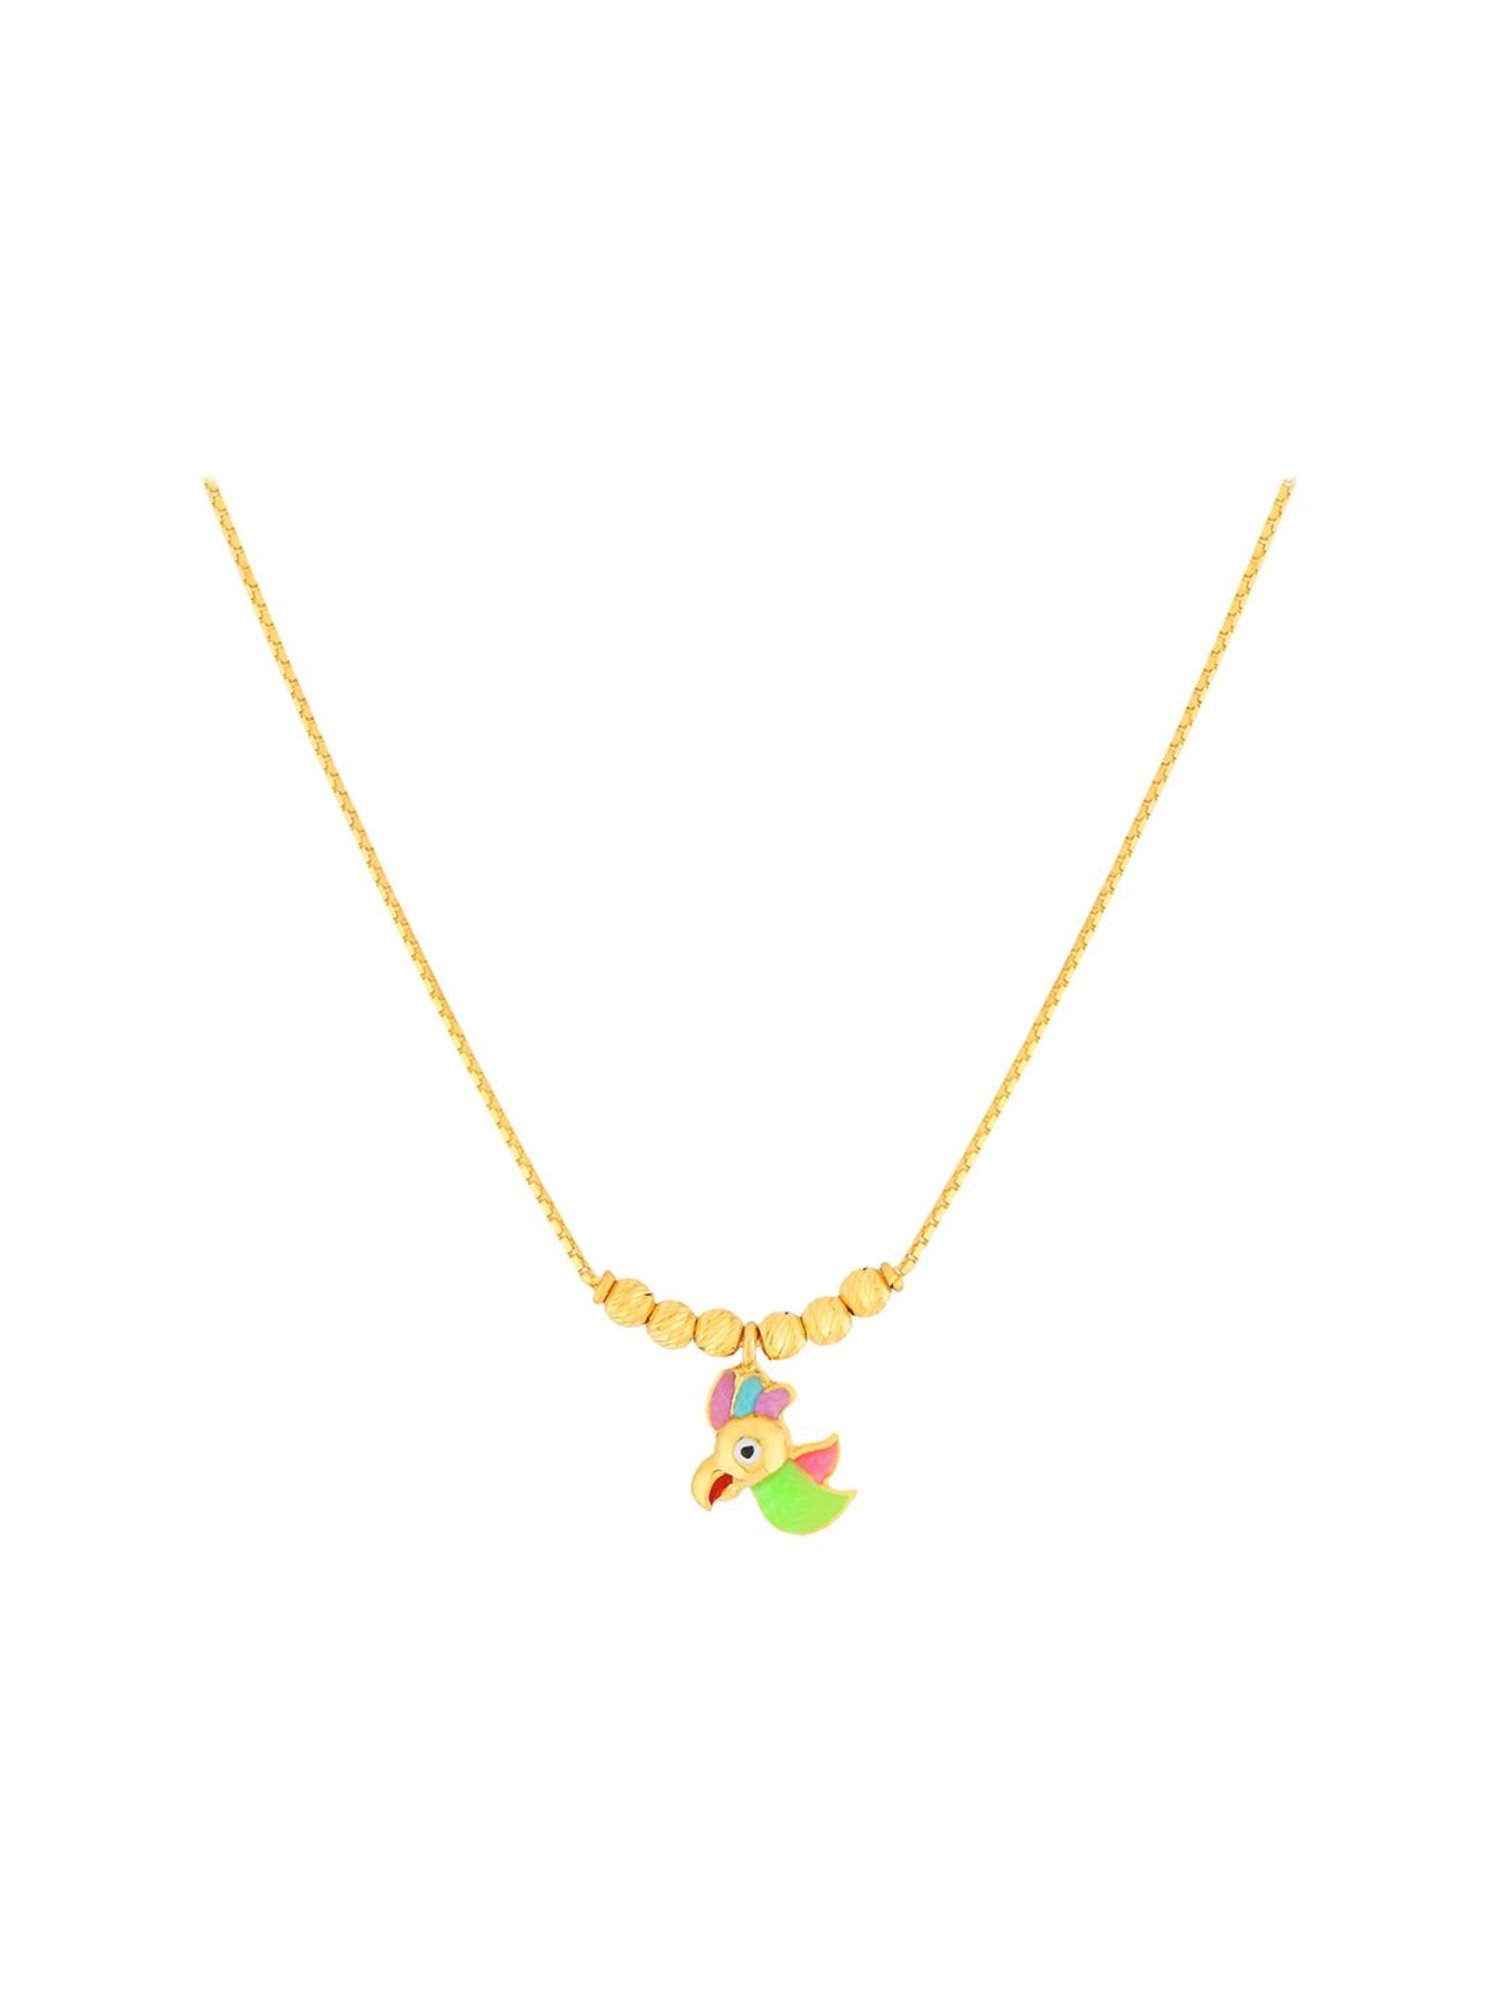 Jane Marie | KIDS MULTI PINK WITH PEARL ACCENTS BEADED WITH GOLD HEART BEAD  STATIONS NECKLACE | Baby Sweet Pea's Boutique